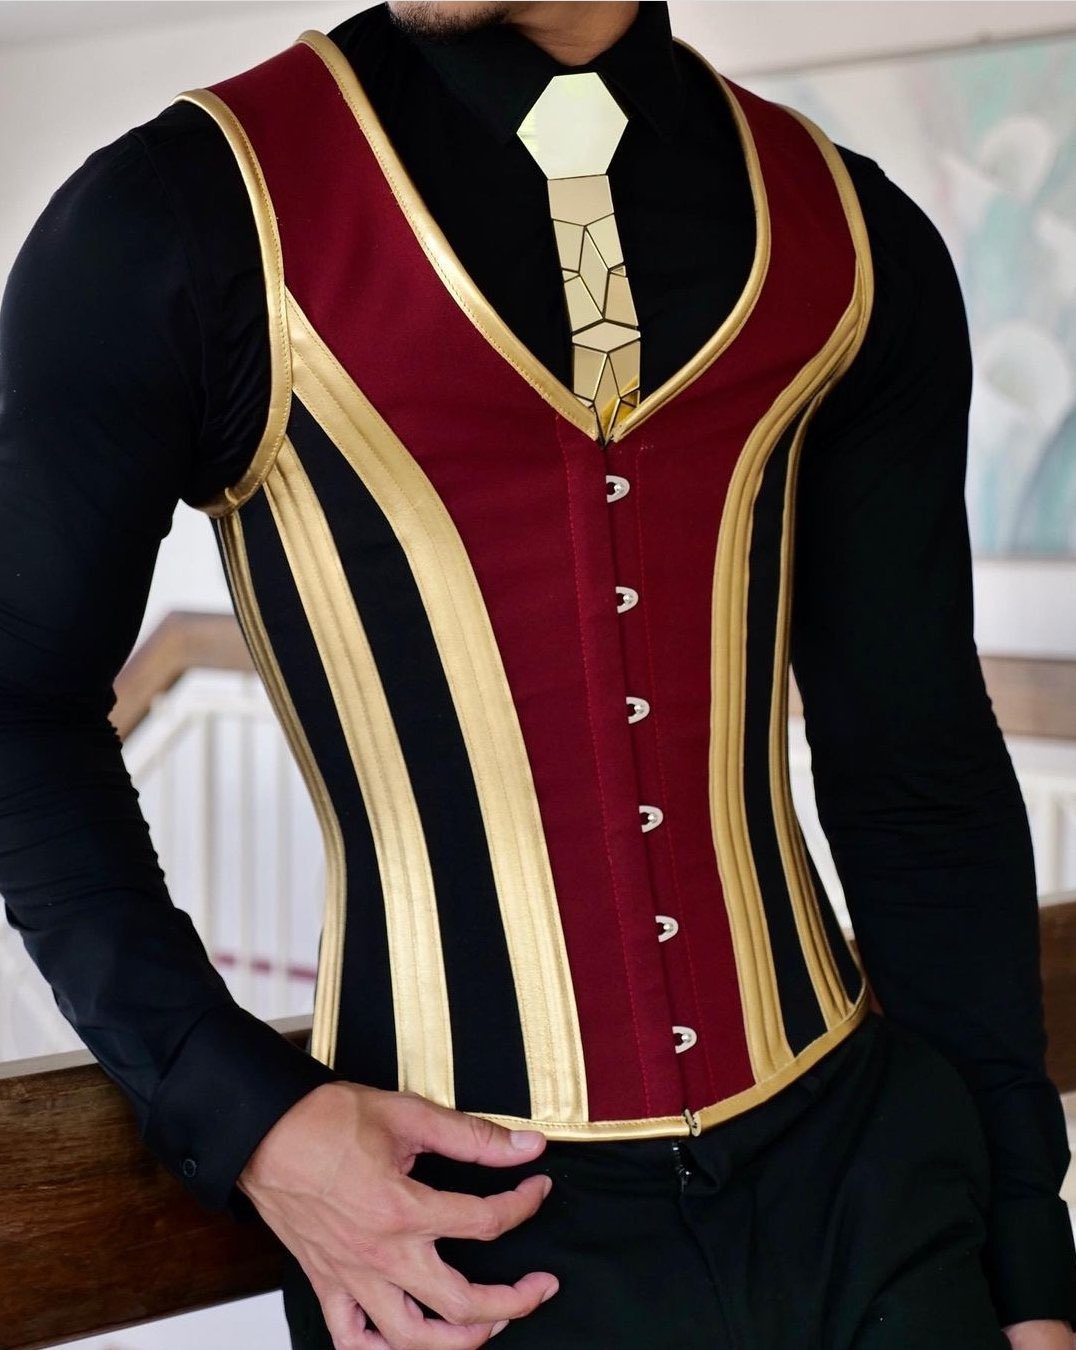 𝐓𝐡𝐞 𝐁𝐢 𝐢𝐧 𝐁𝐢𝐫𝐝-𝐁𝐫𝐚𝐢𝐧 on X: What if: Male corset